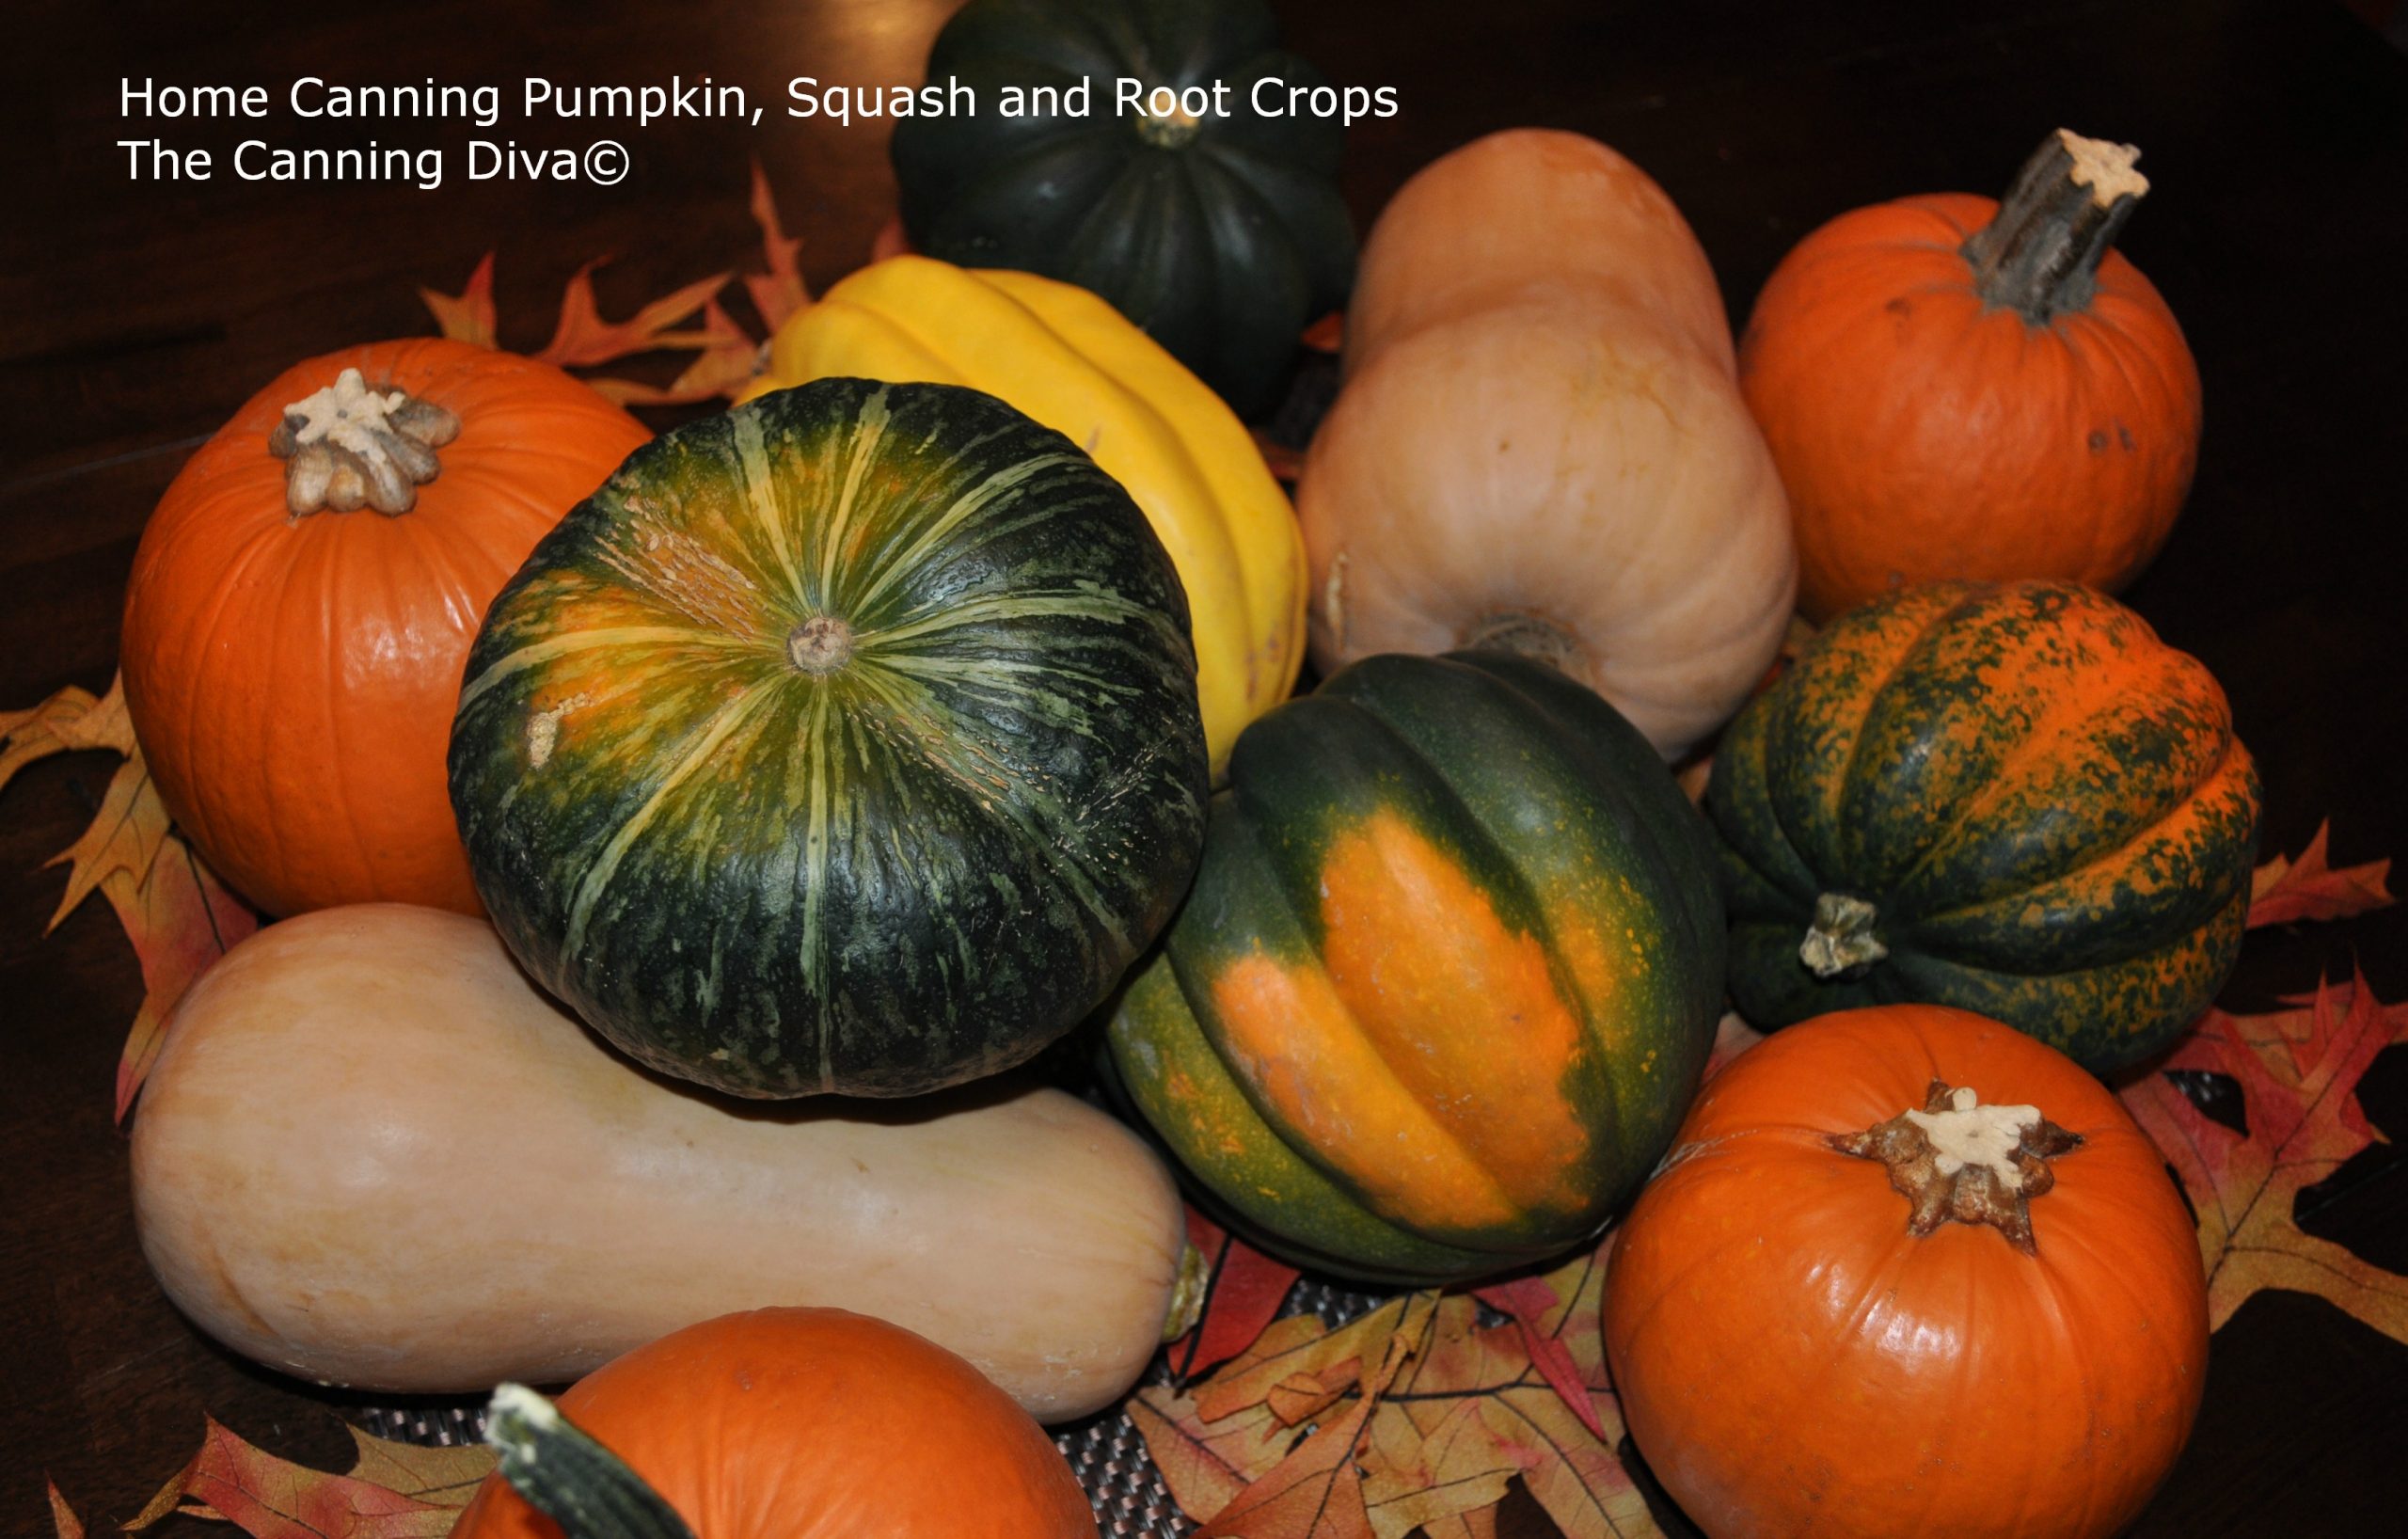 Home Canning Pumpkin Squash and Root Crops